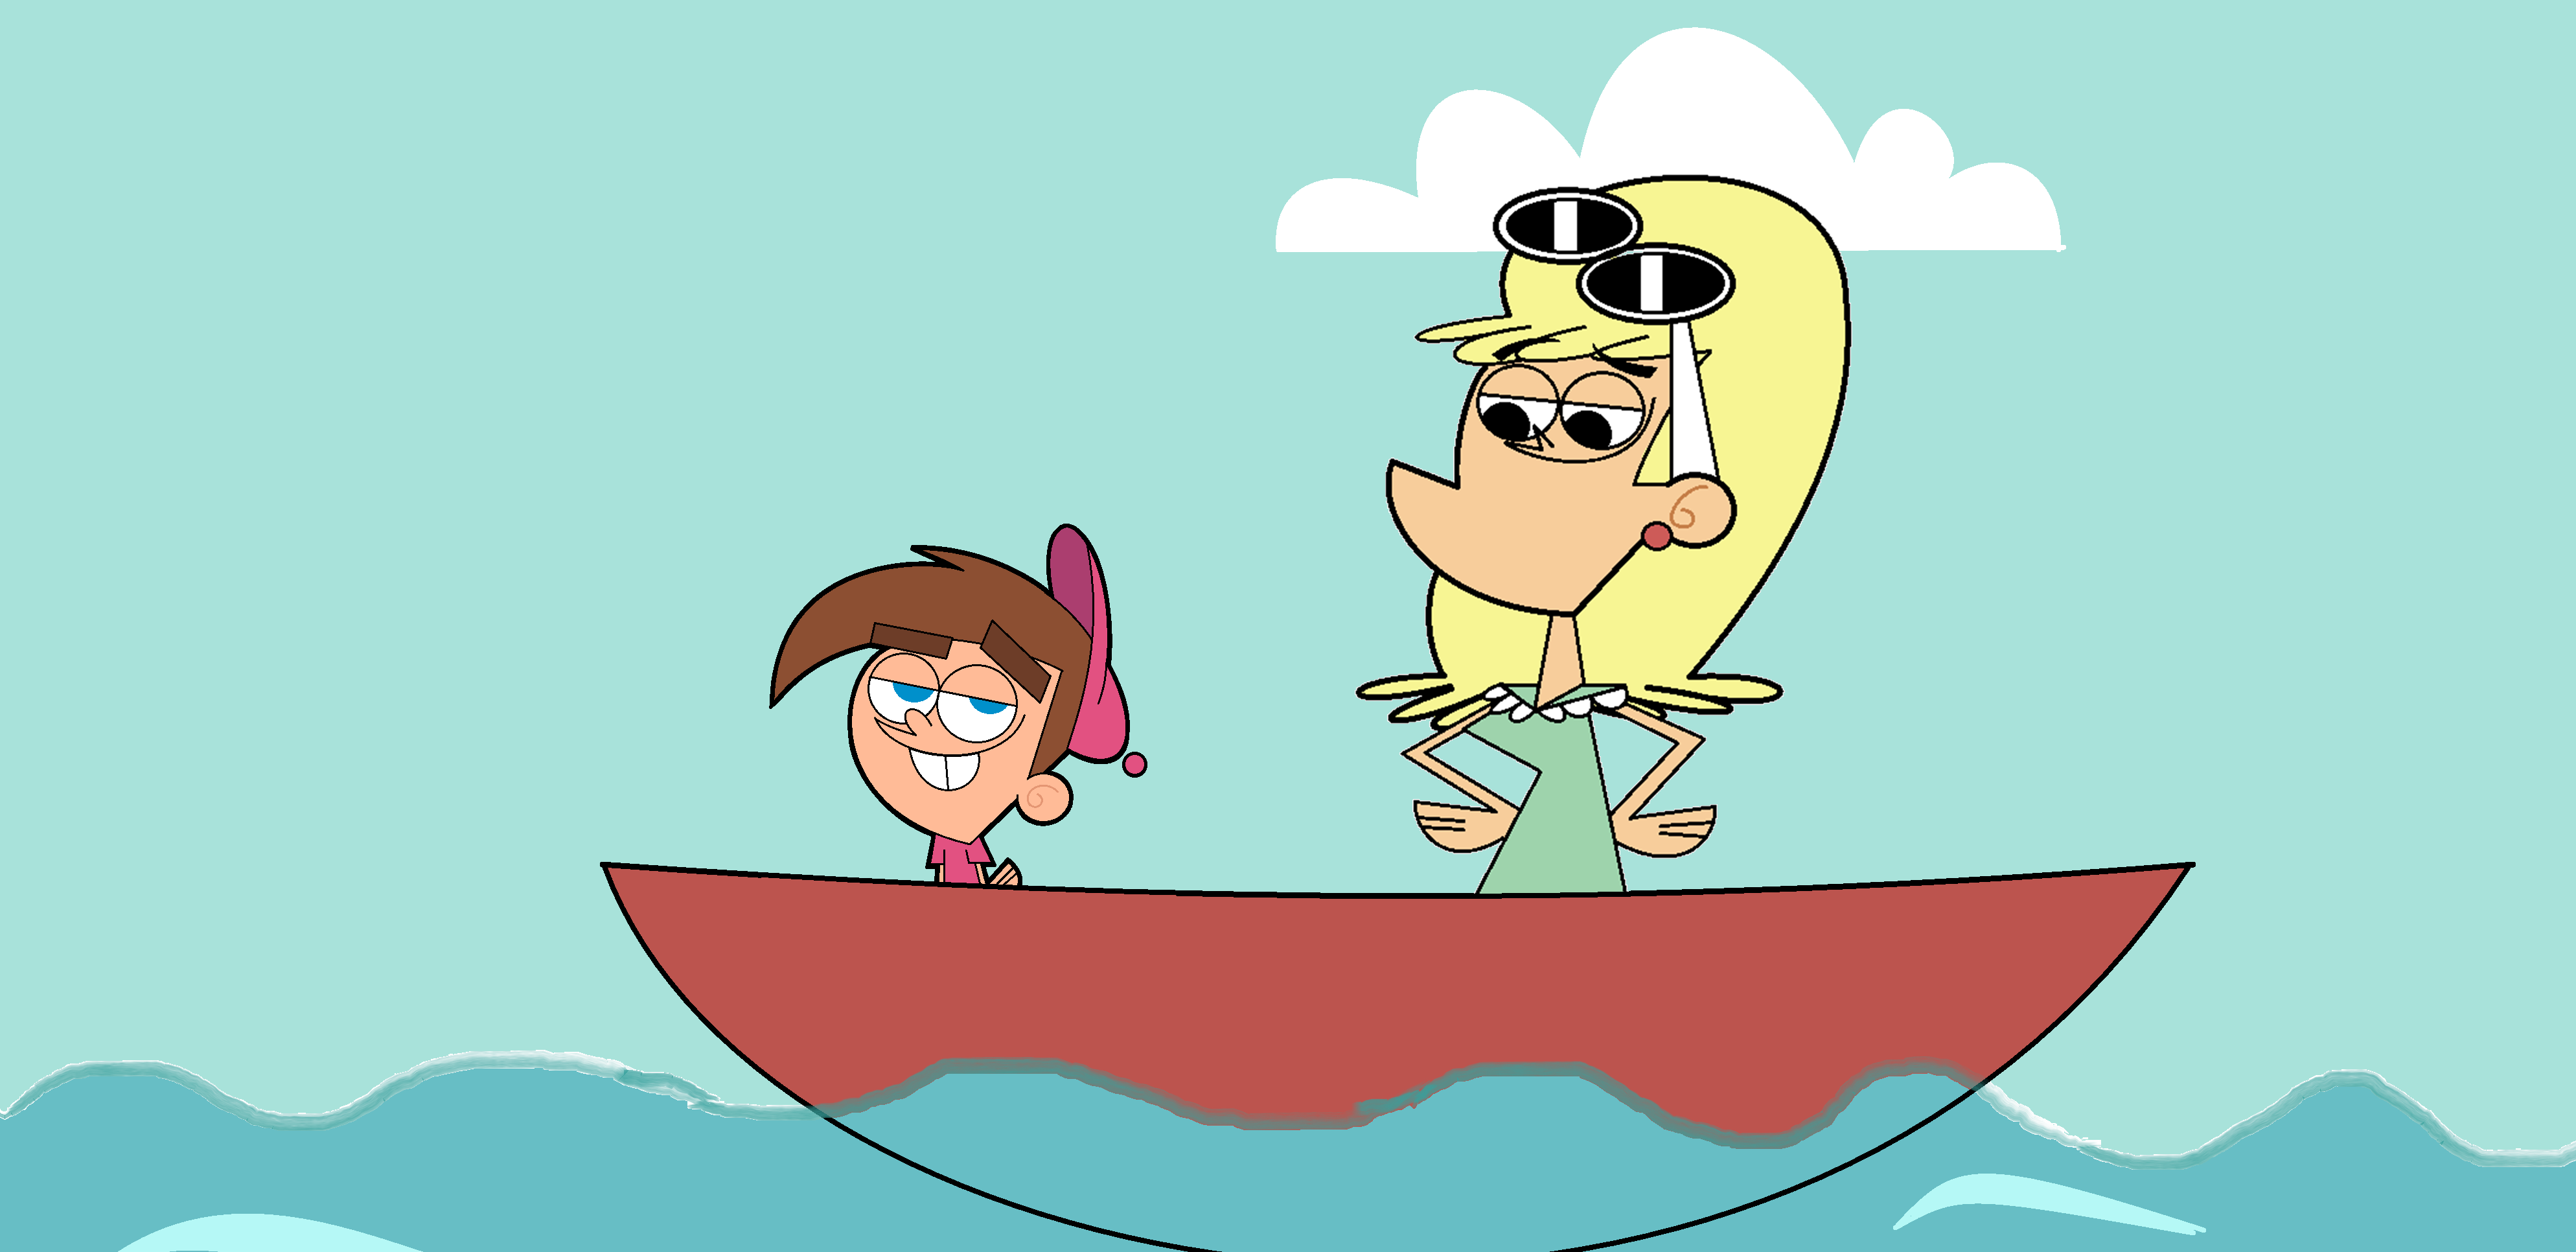 fairly odd parents vicky and timmy kiss